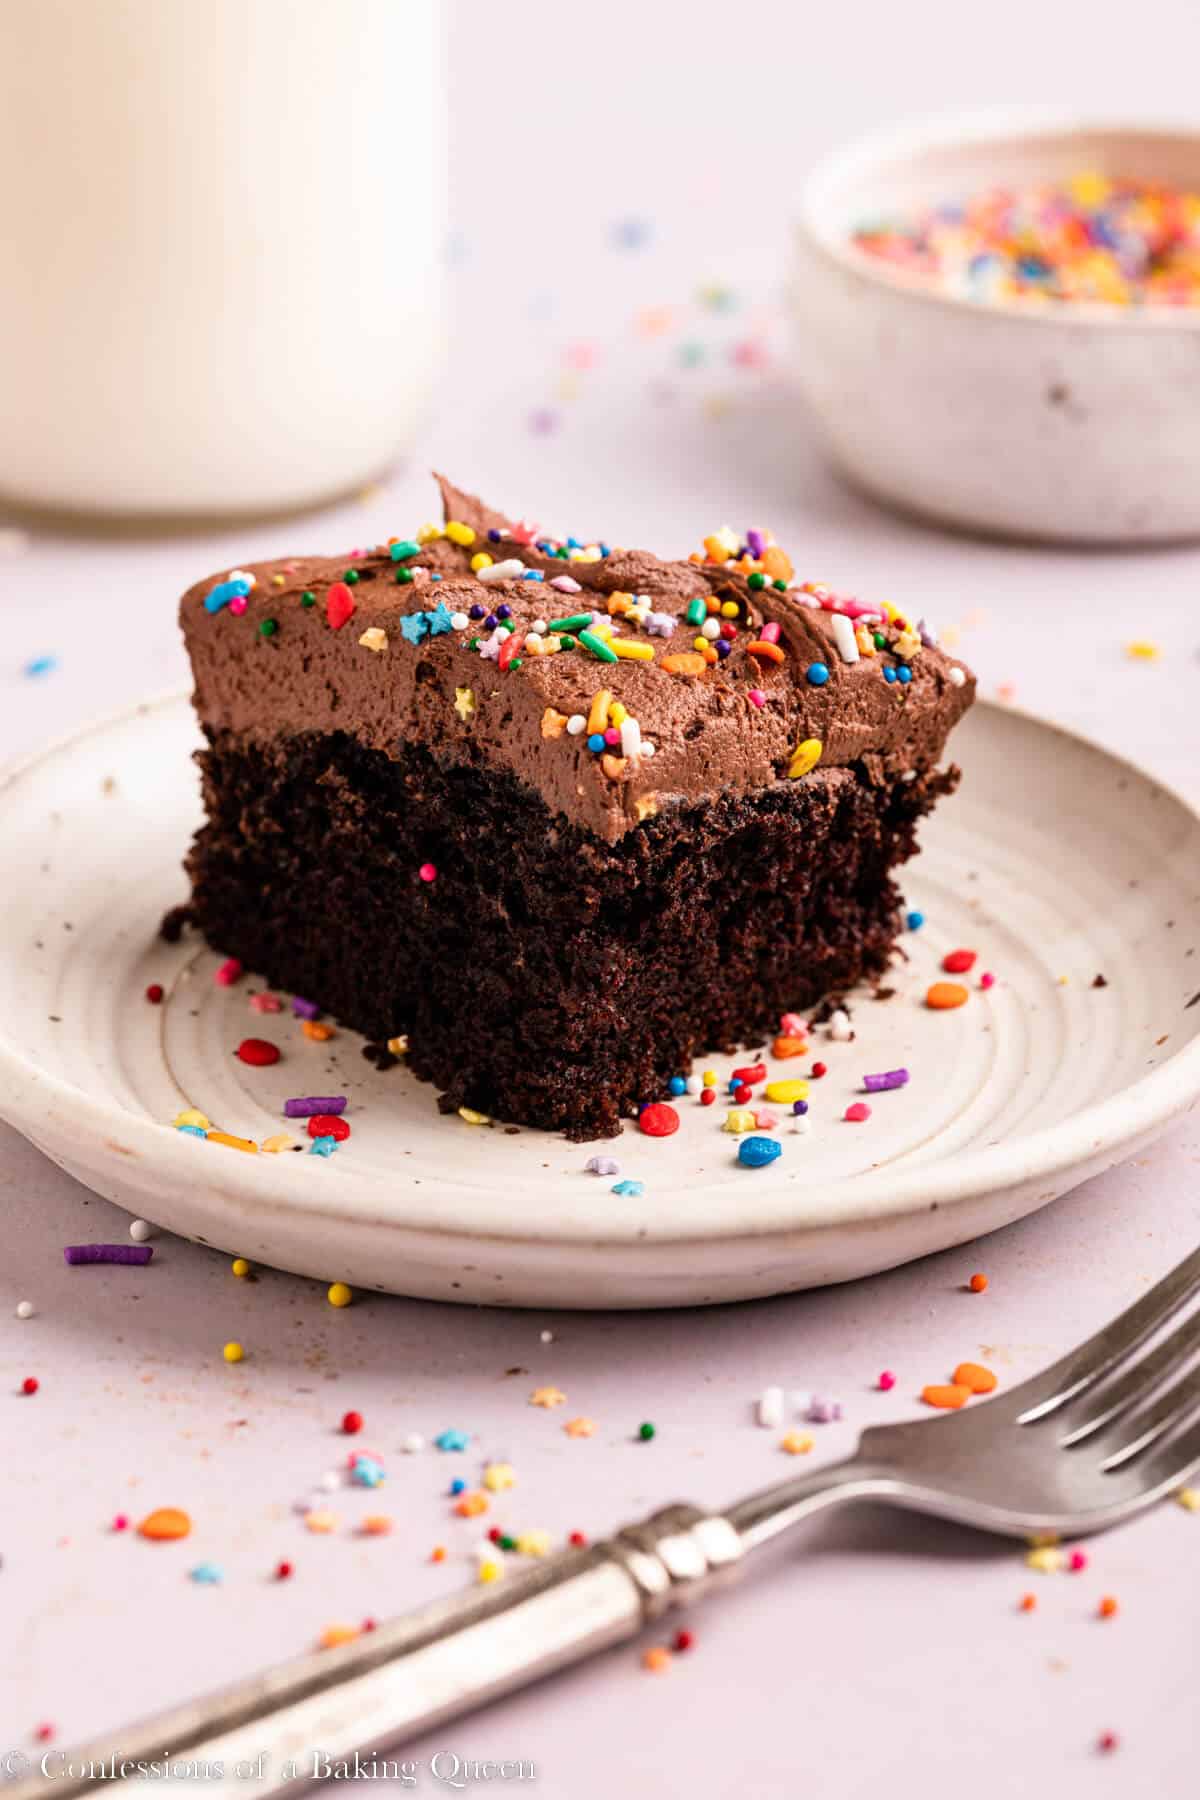 chocolate cake slice on a white plate with sprinkles on a light surface with a fork, bowl of sprinkles and glass of milk